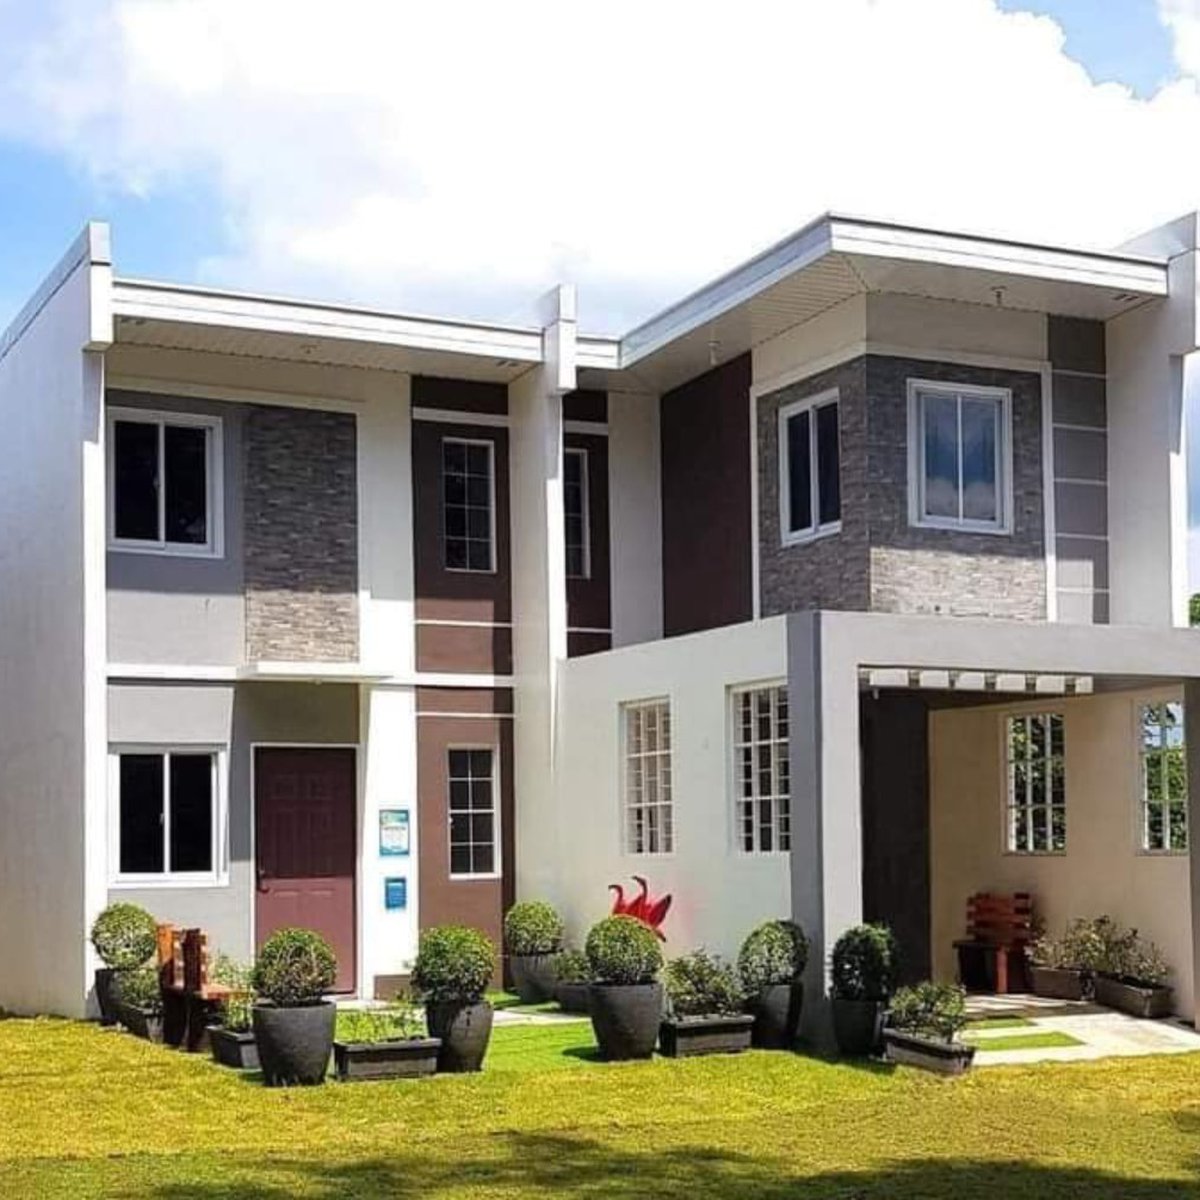 2-bedroom Rowhouse For Sale in Batangas City Batangas